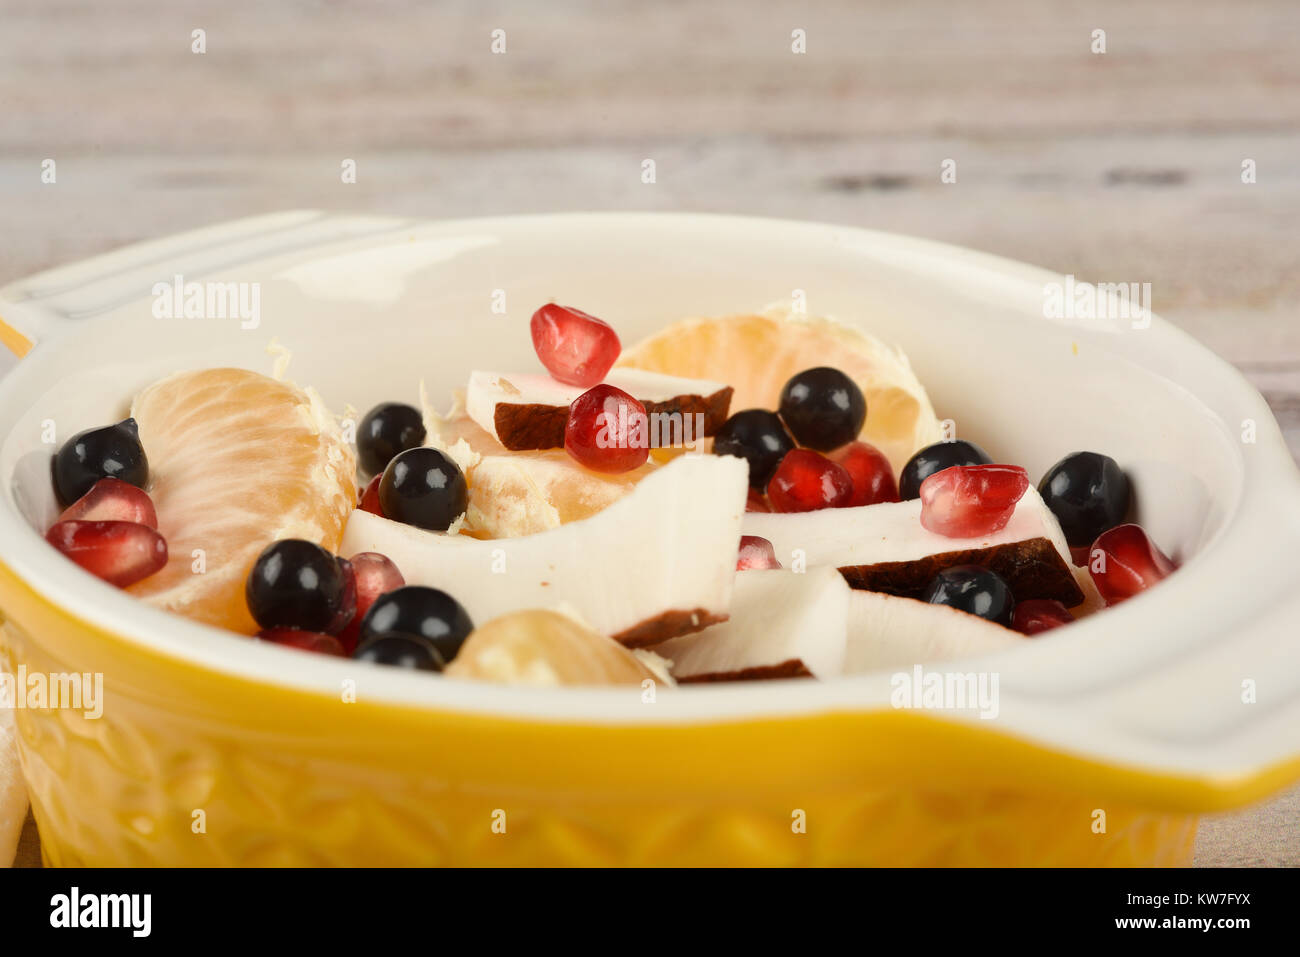 Fresh fruits salad in plate Stock Photo